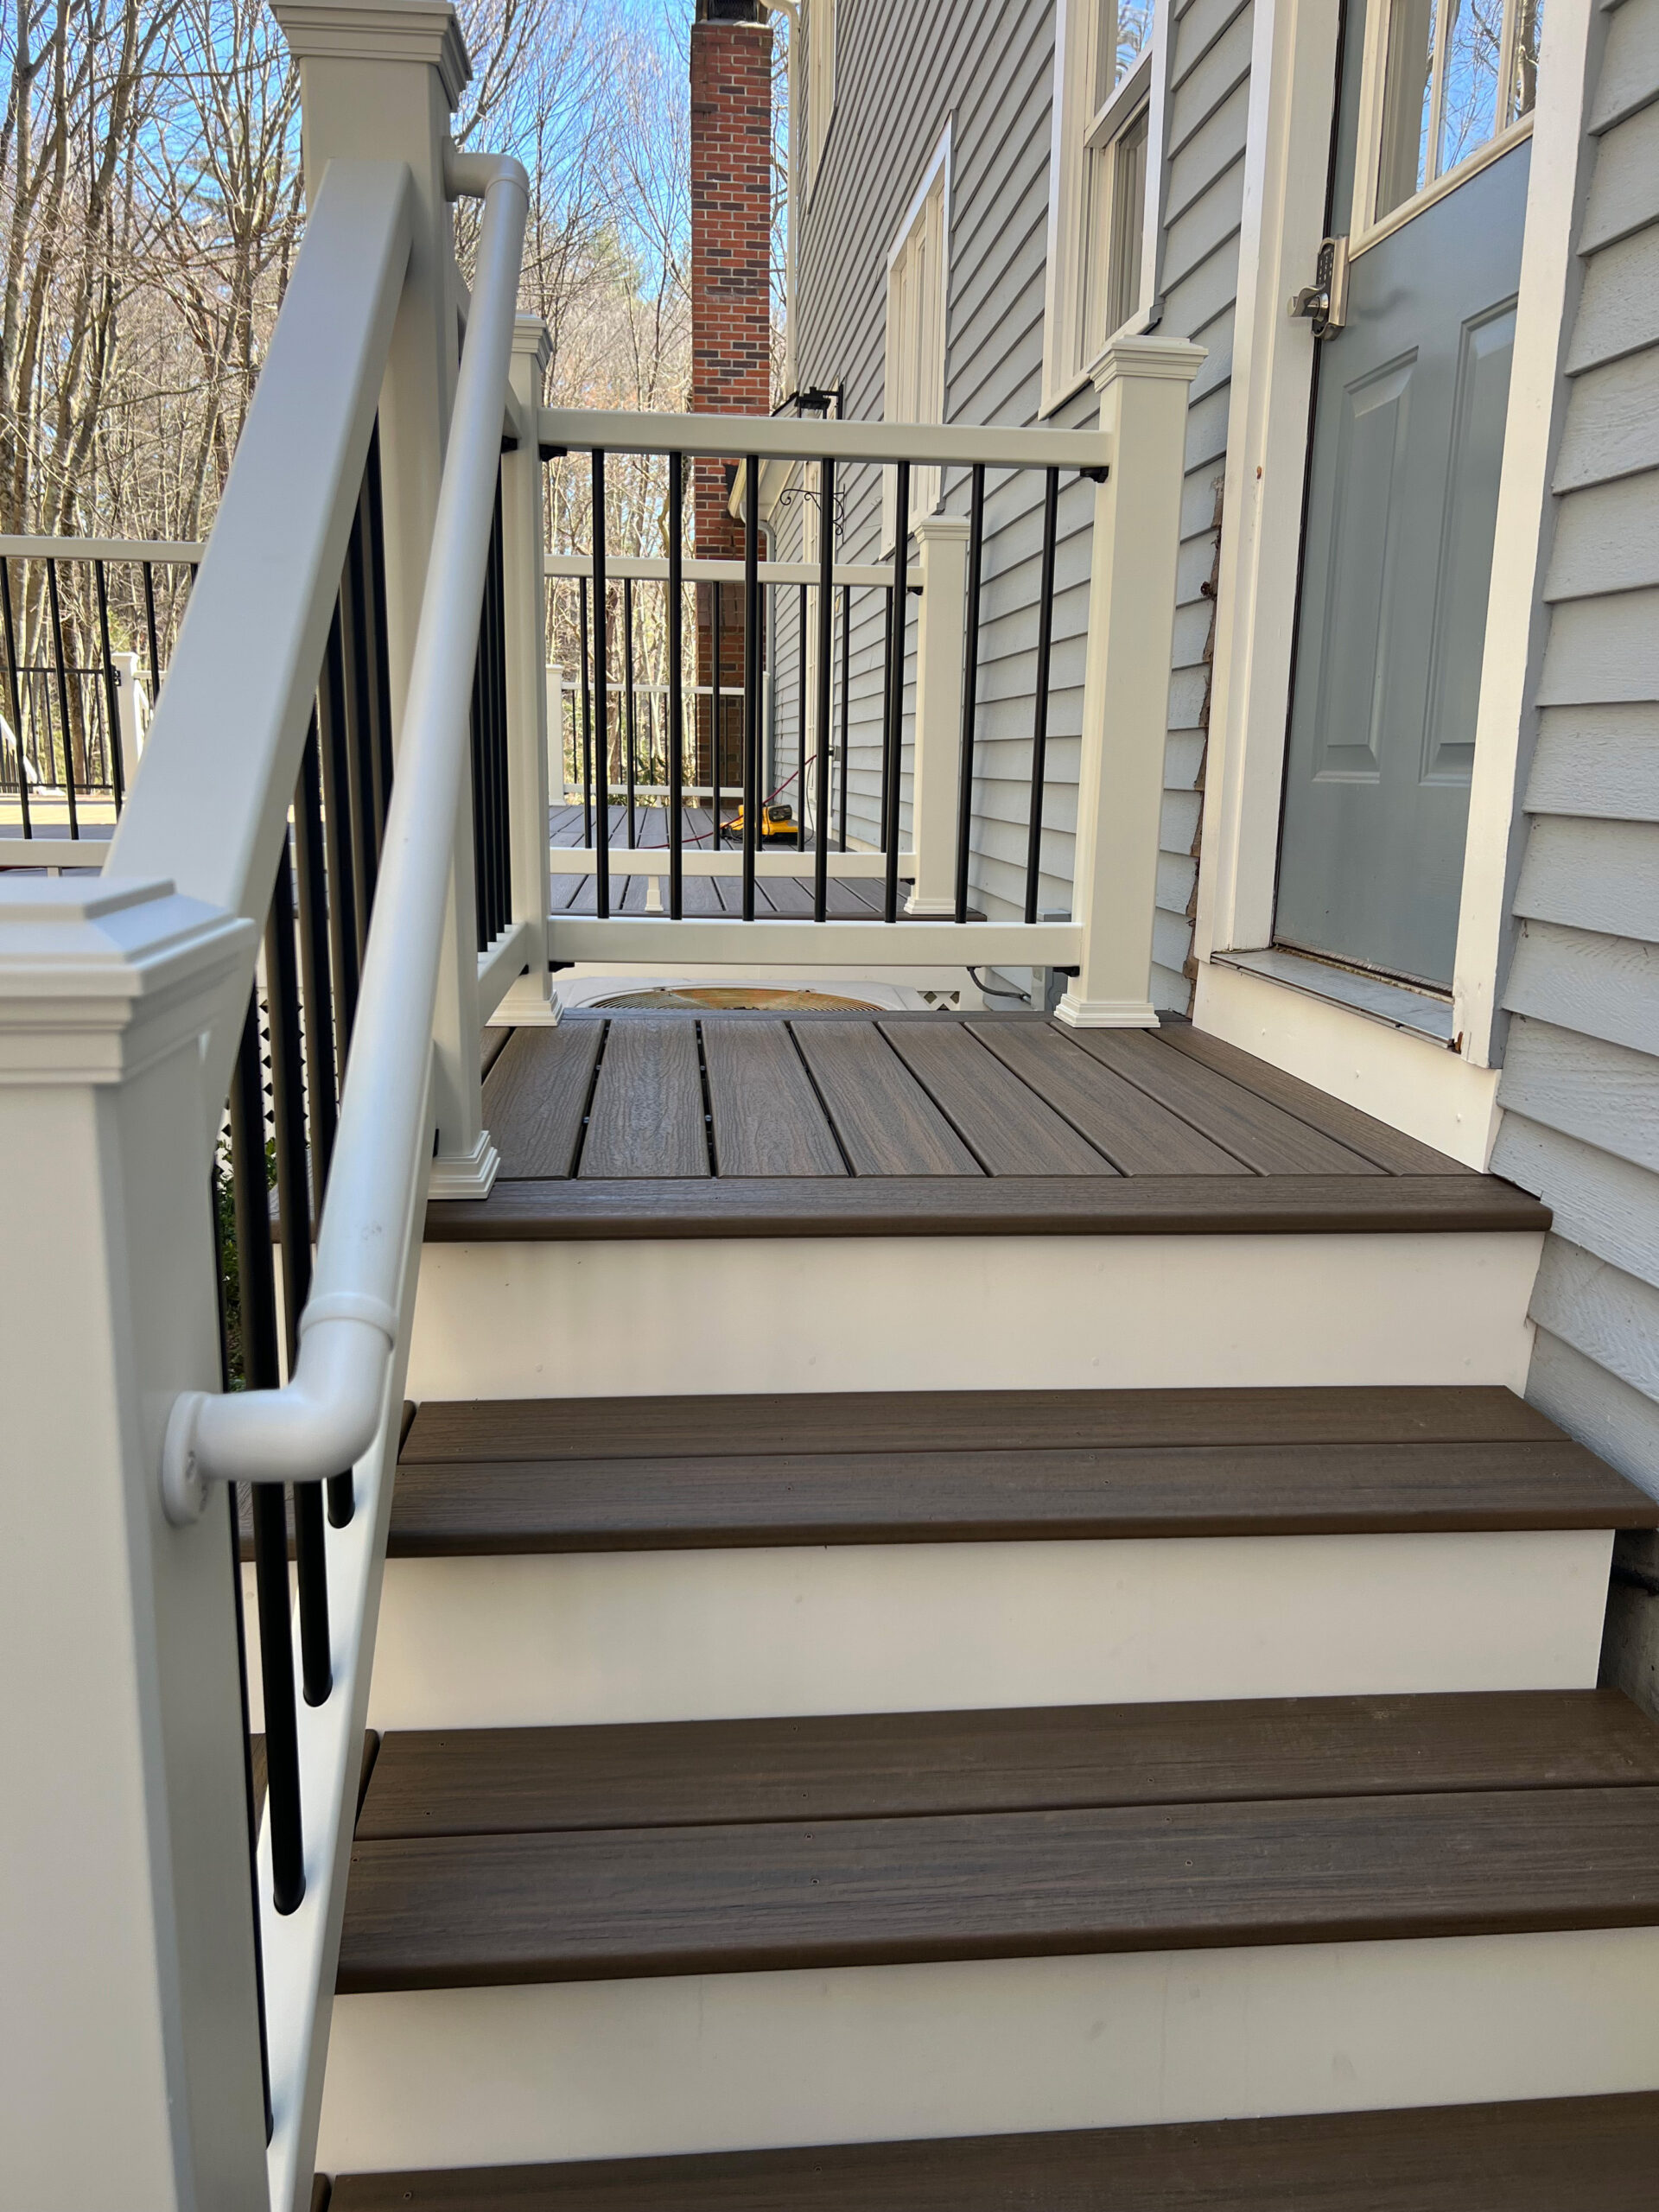 Trex toasted sand deck and white railings